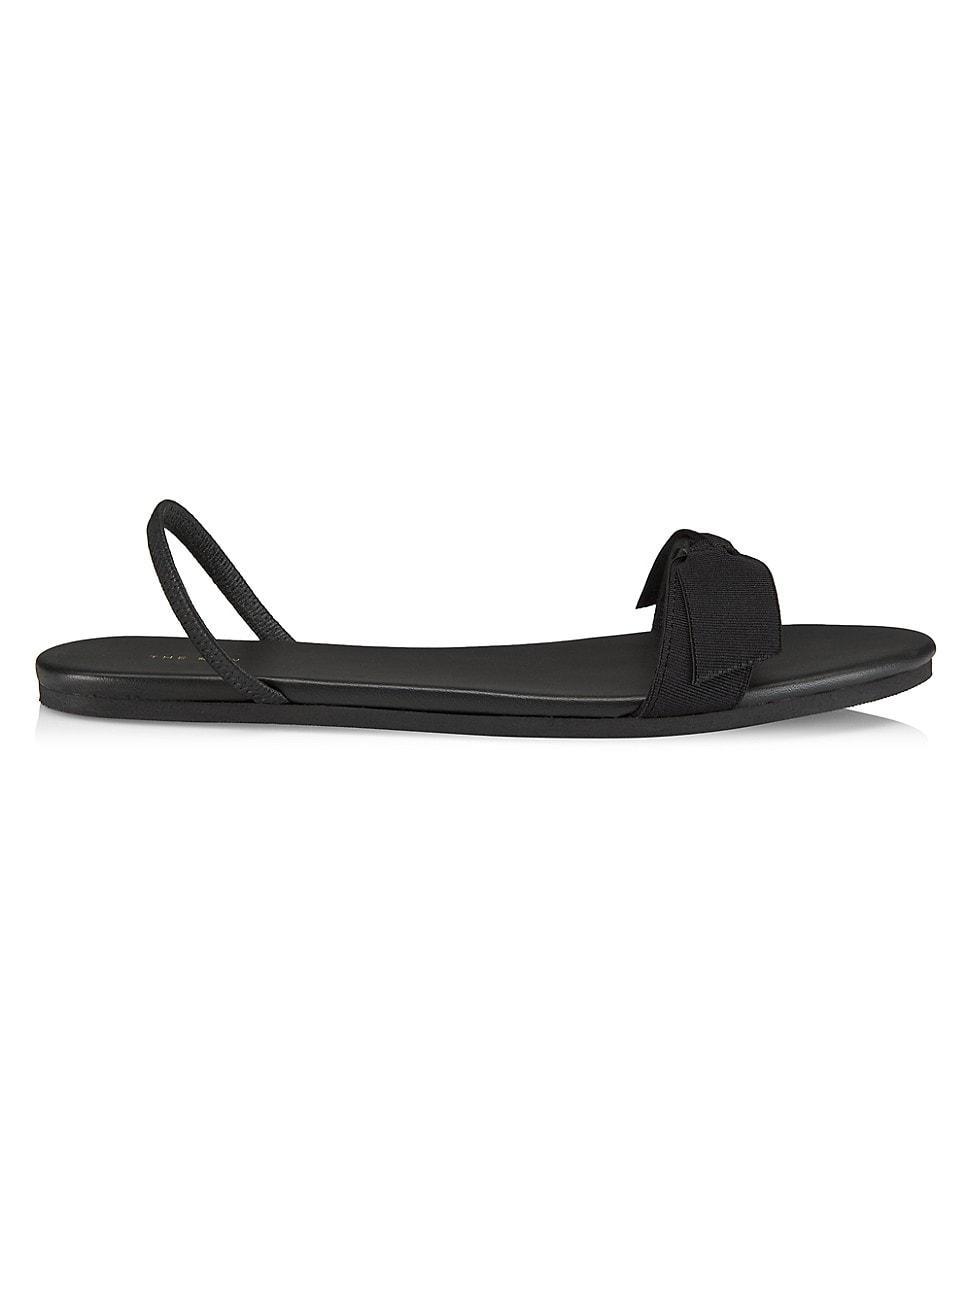 Womens Flat Bow Sandals Product Image